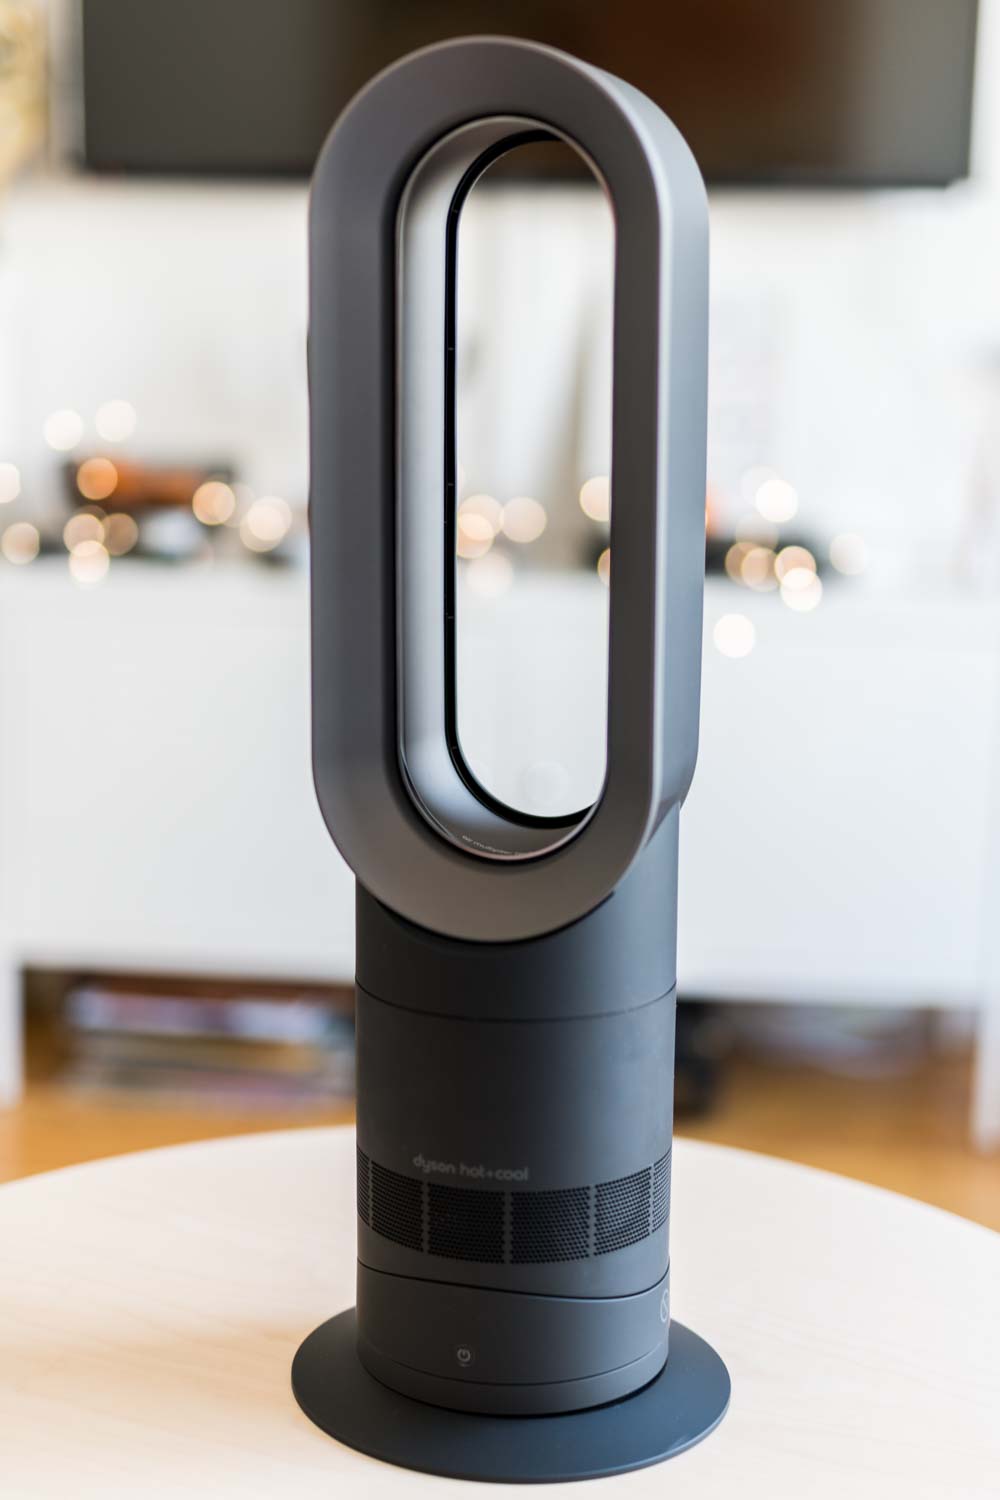 Feeling a little cold? Try this Dyson hot + cool fan and you won’t be disappointed - HOME GIFT IDEAS - THE ULTIMATE GIFT LIST FOR MODERN MEN